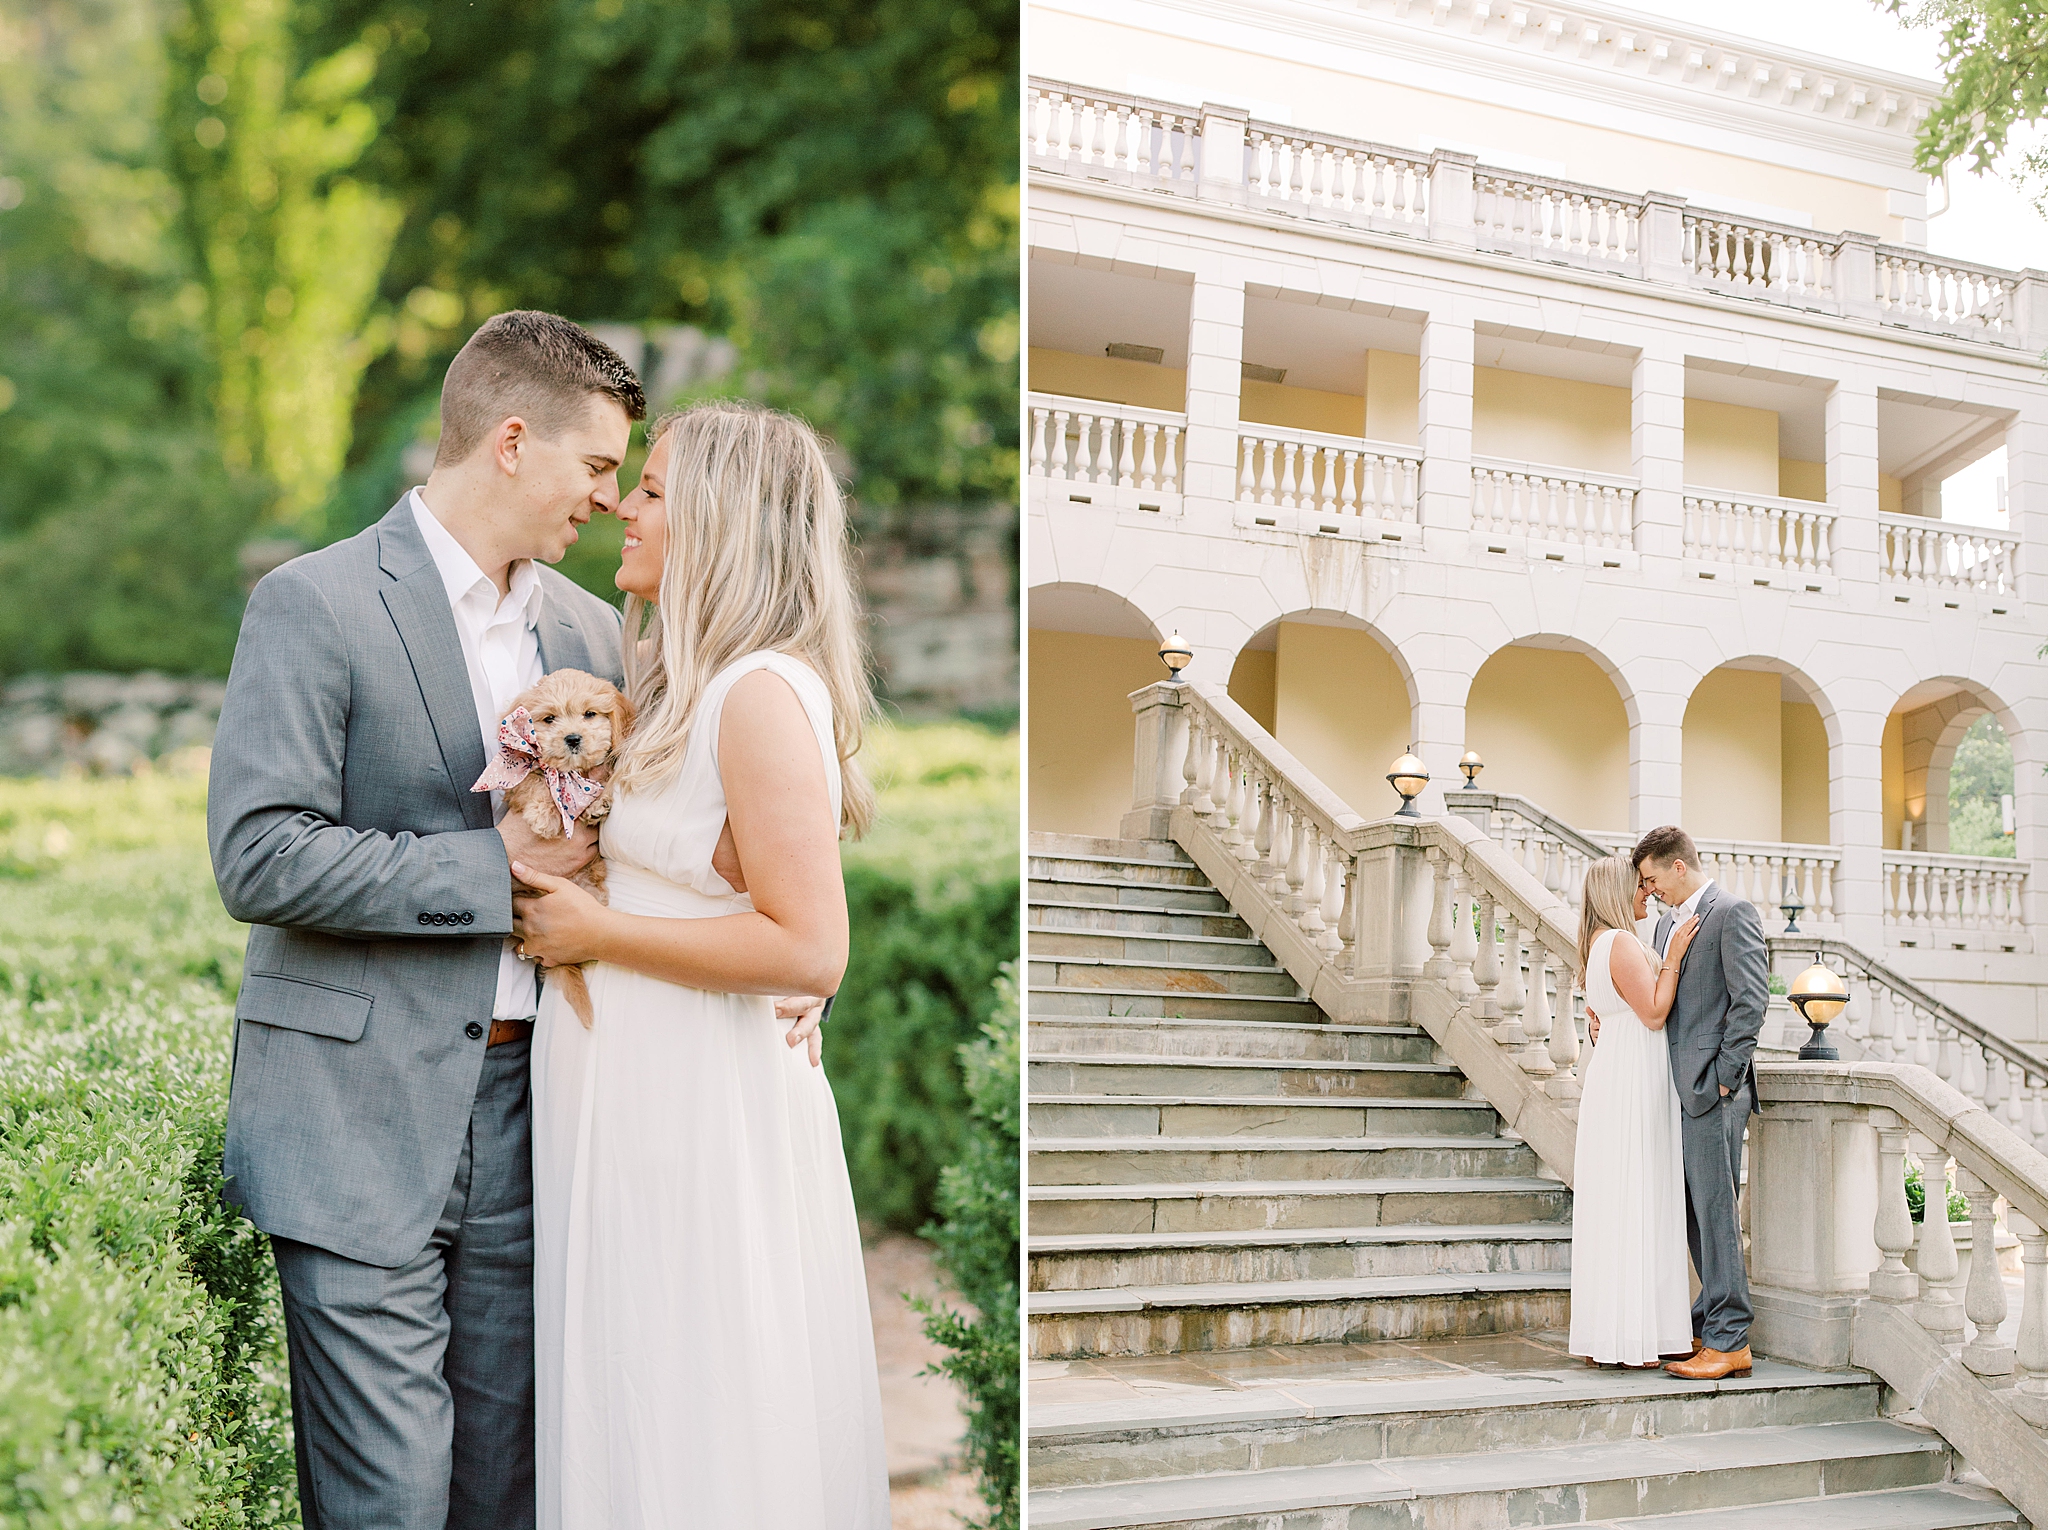 A sunrise engagement session in the gardens at Airlie Center in Warrenton, VA featuring an adorable 9-week old puppy!